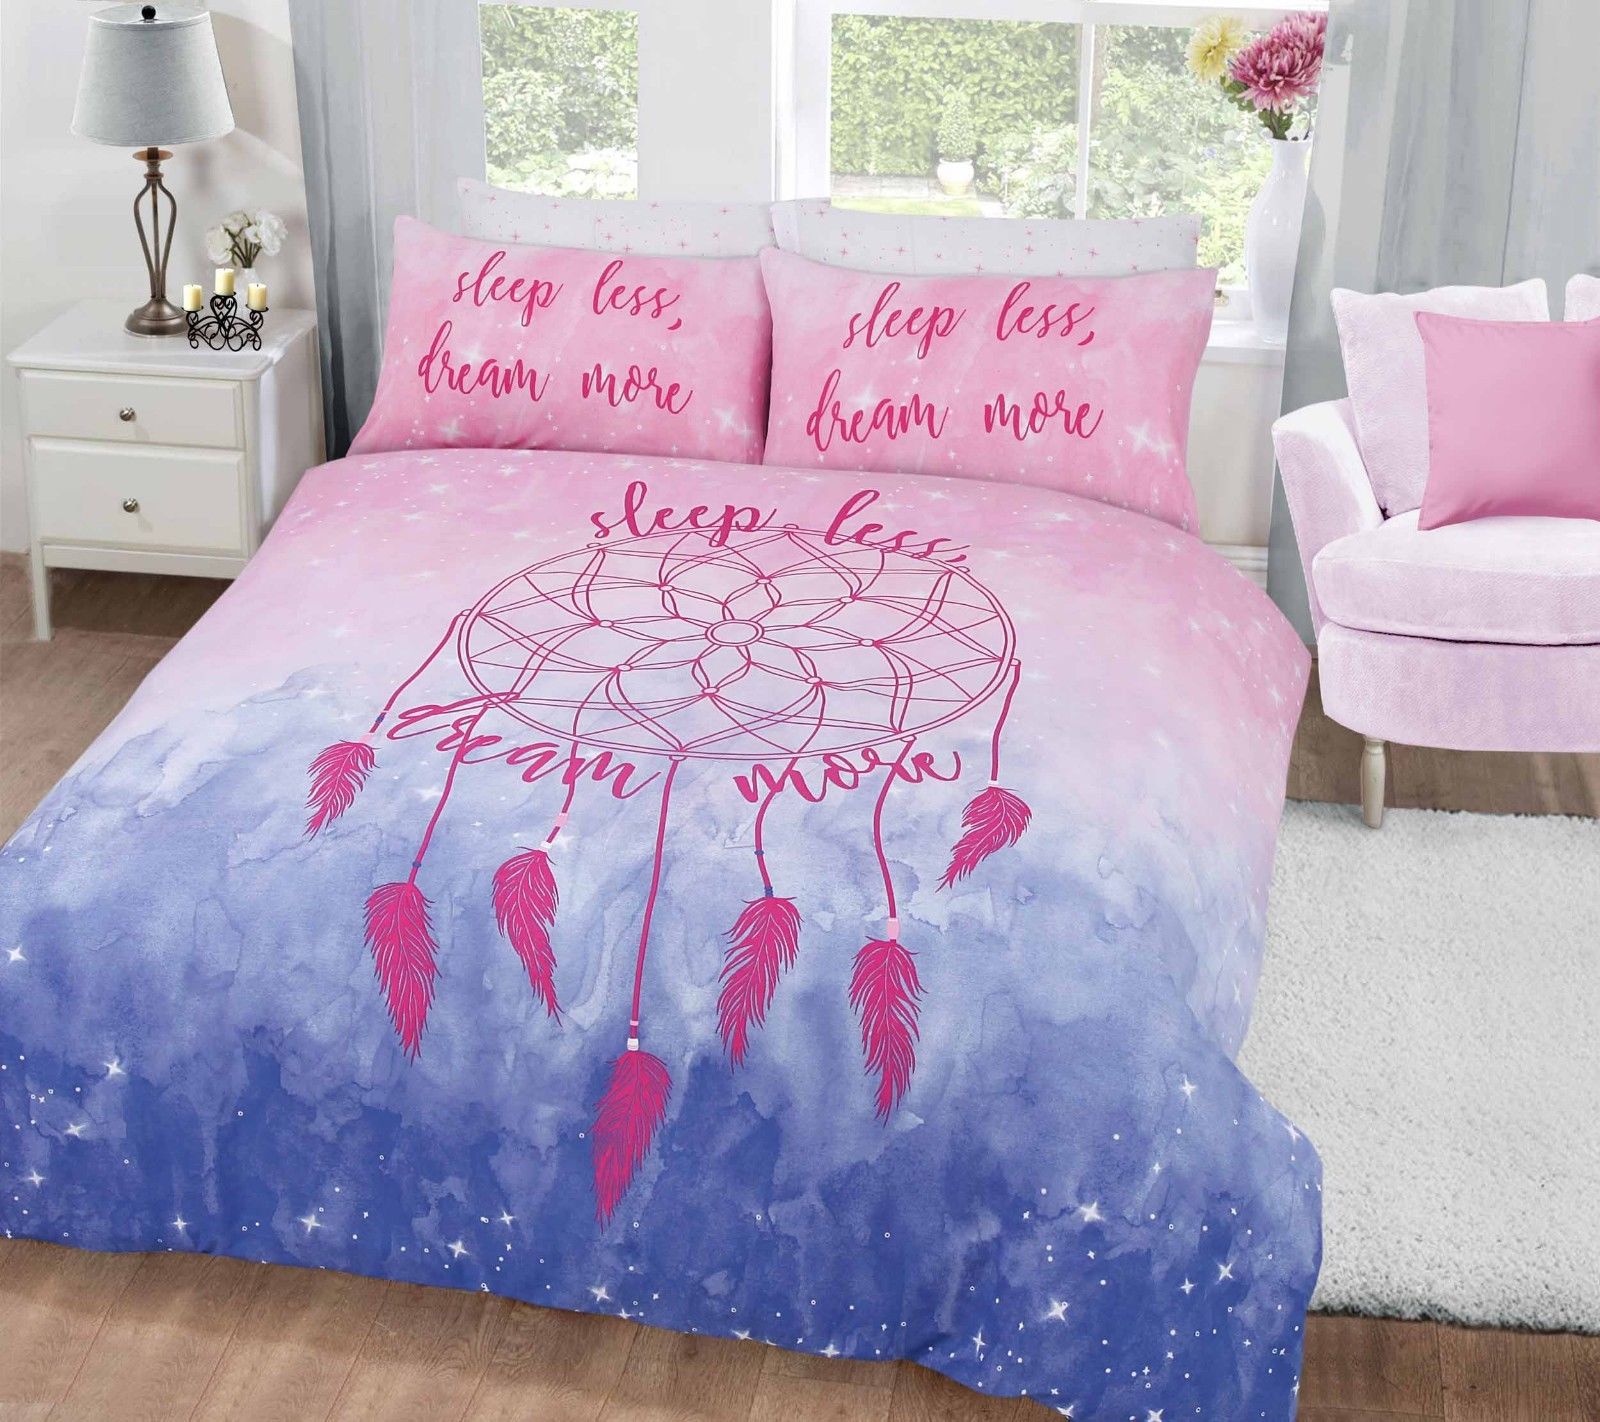 Sleep Less Dream More Pink Blue Duvet Cover Quilt Bedding Set With